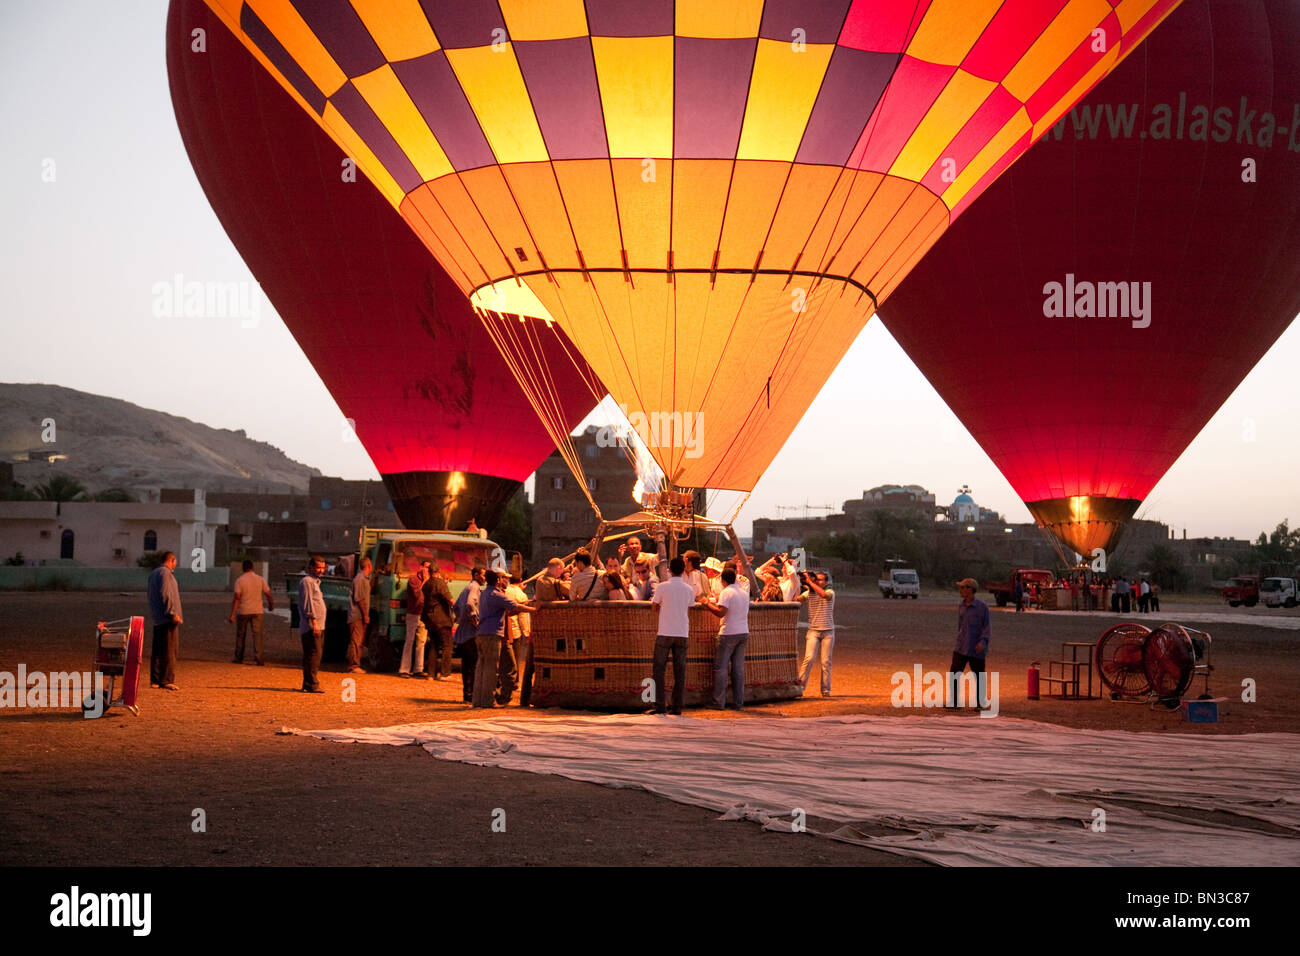 Three hot air balloons preparing to lift off at dawn, Luxor, Egypt, Africa, concept of Adventure holiday Stock Photo